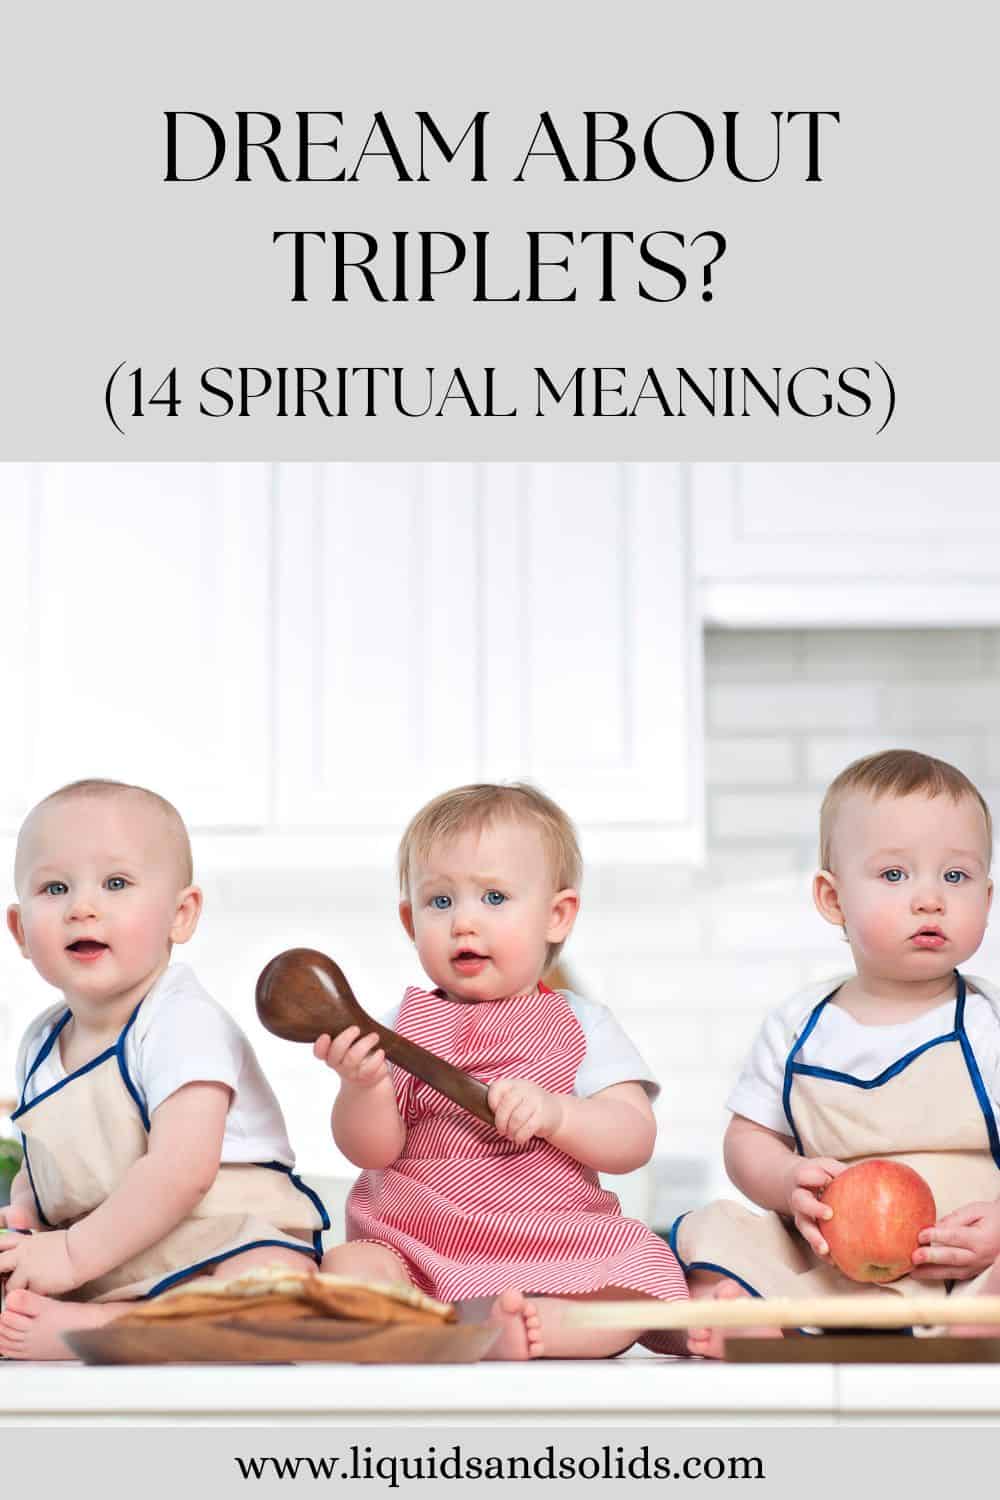 Dream About Triplets? (14 Spiritual Meanings)